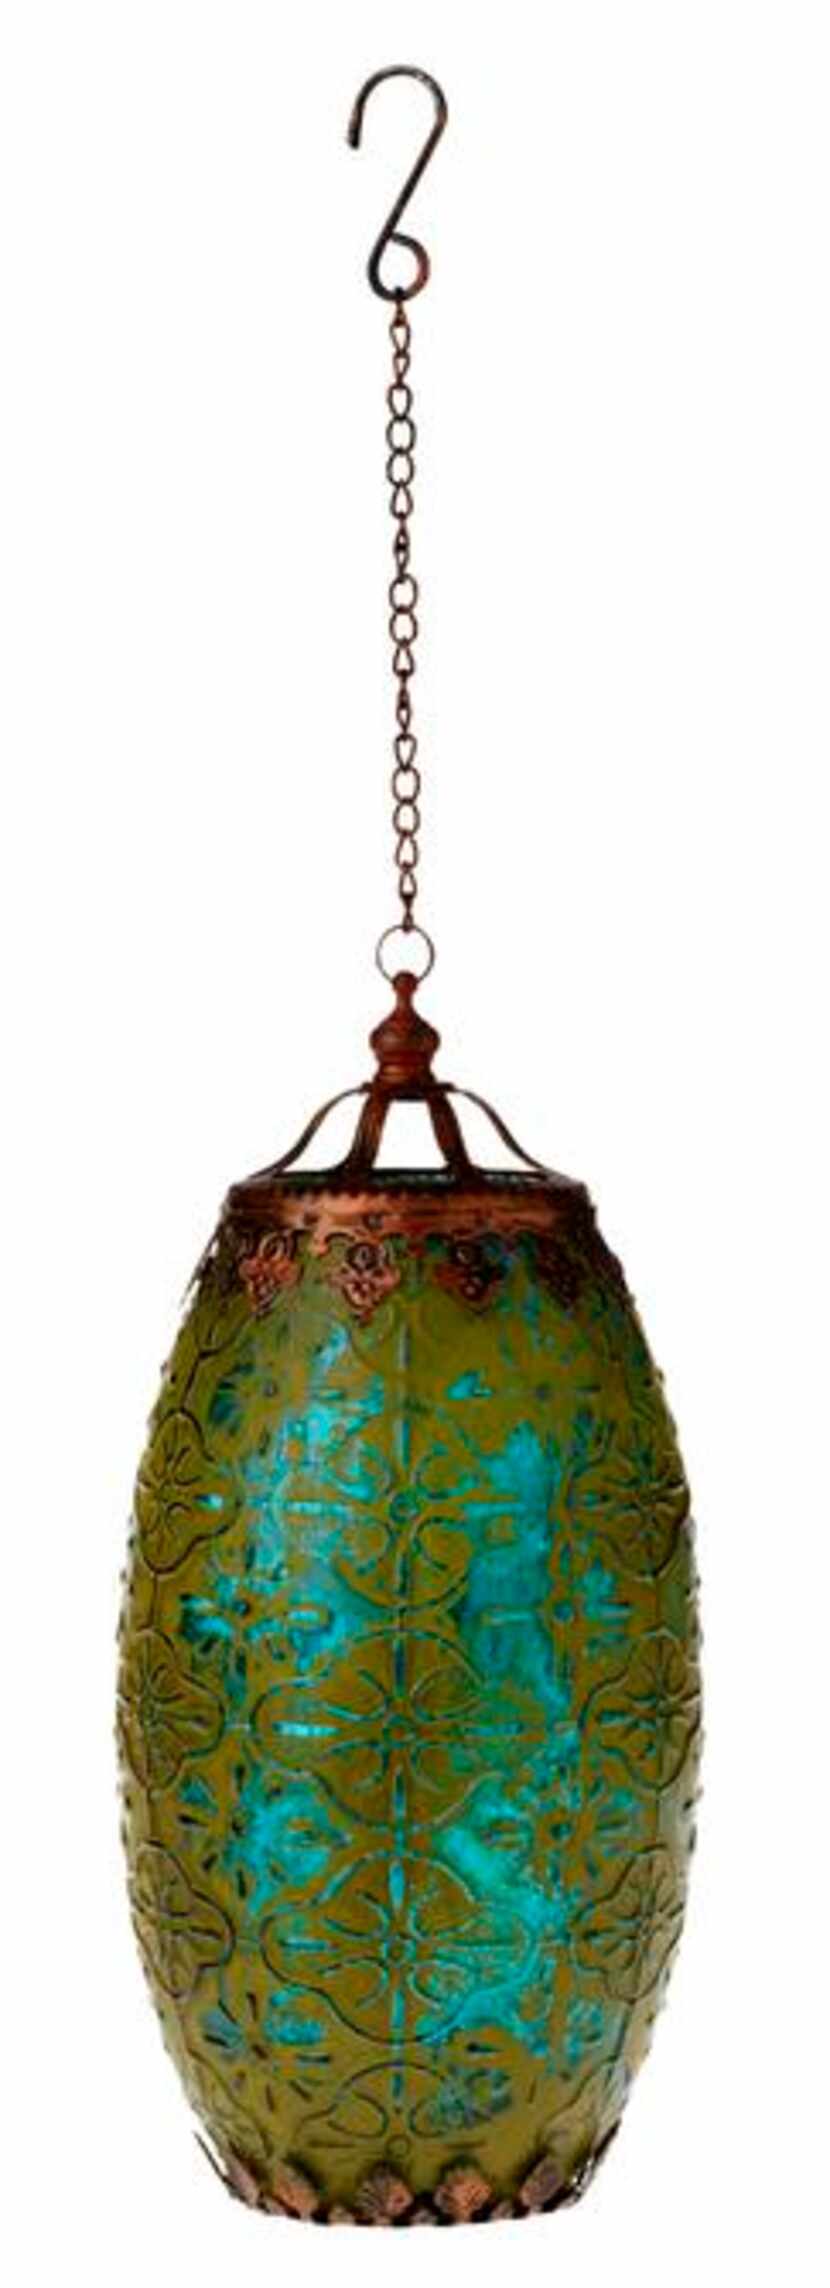 
Boho glow. Light a path with painted mercury glass lanterns strung from hooks. This one...